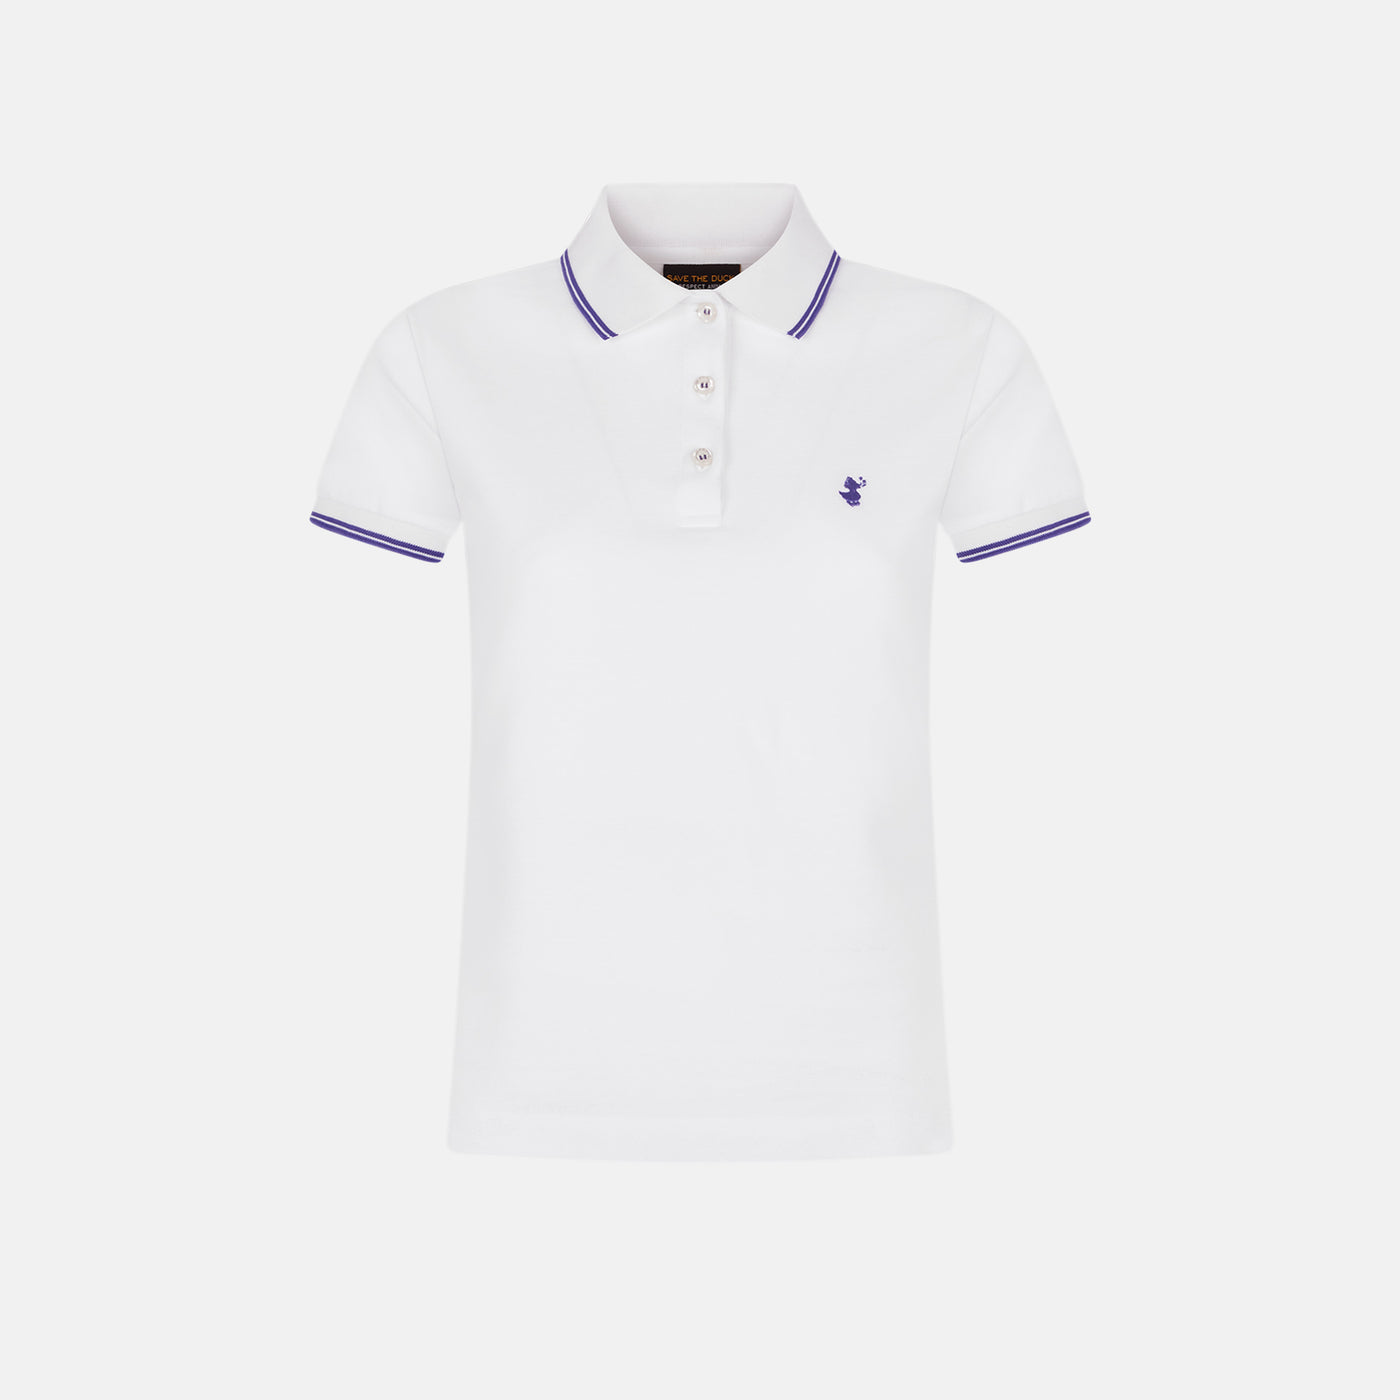 Front View of Women's Geraldine Polo T-Shirt in White